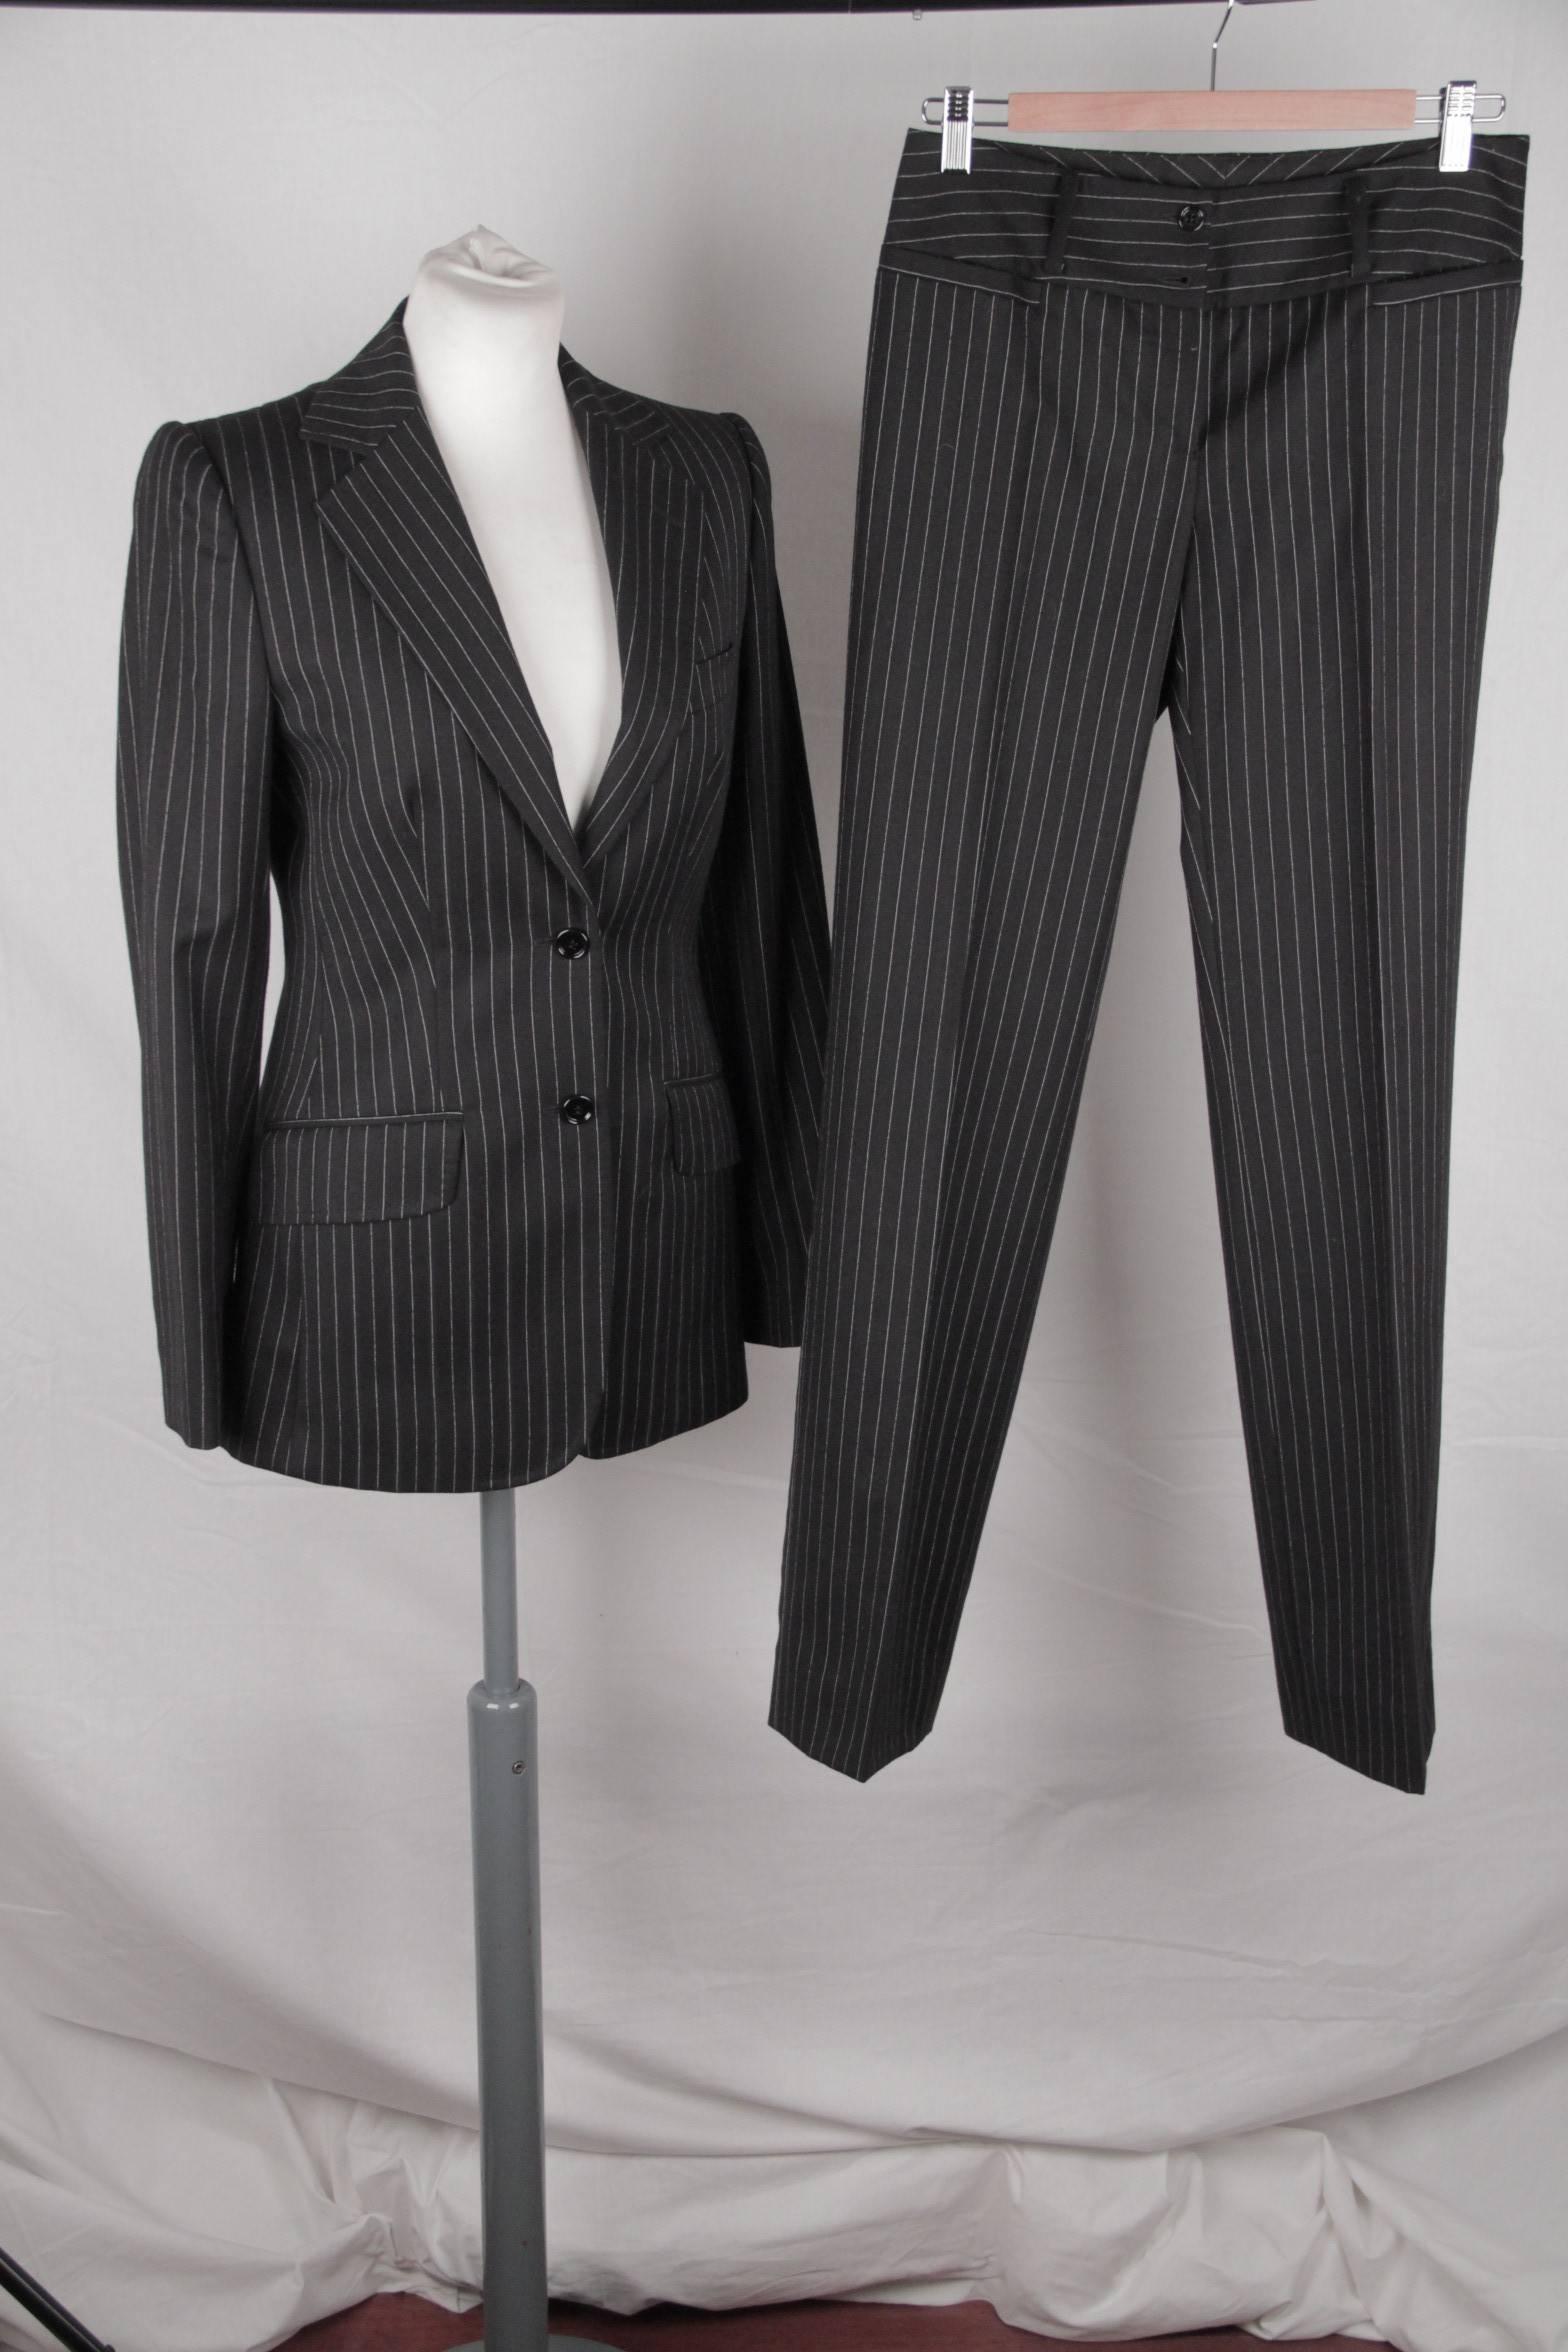 - DOLCE & GABBANA balck pinstriped blazer and trousers suit

- 100% virgin wool 

- Blazer with front button closure

- Trousers with button & zip closure on the front

- Belt loops

- Size : 40 IT (The size shown for this item is the size